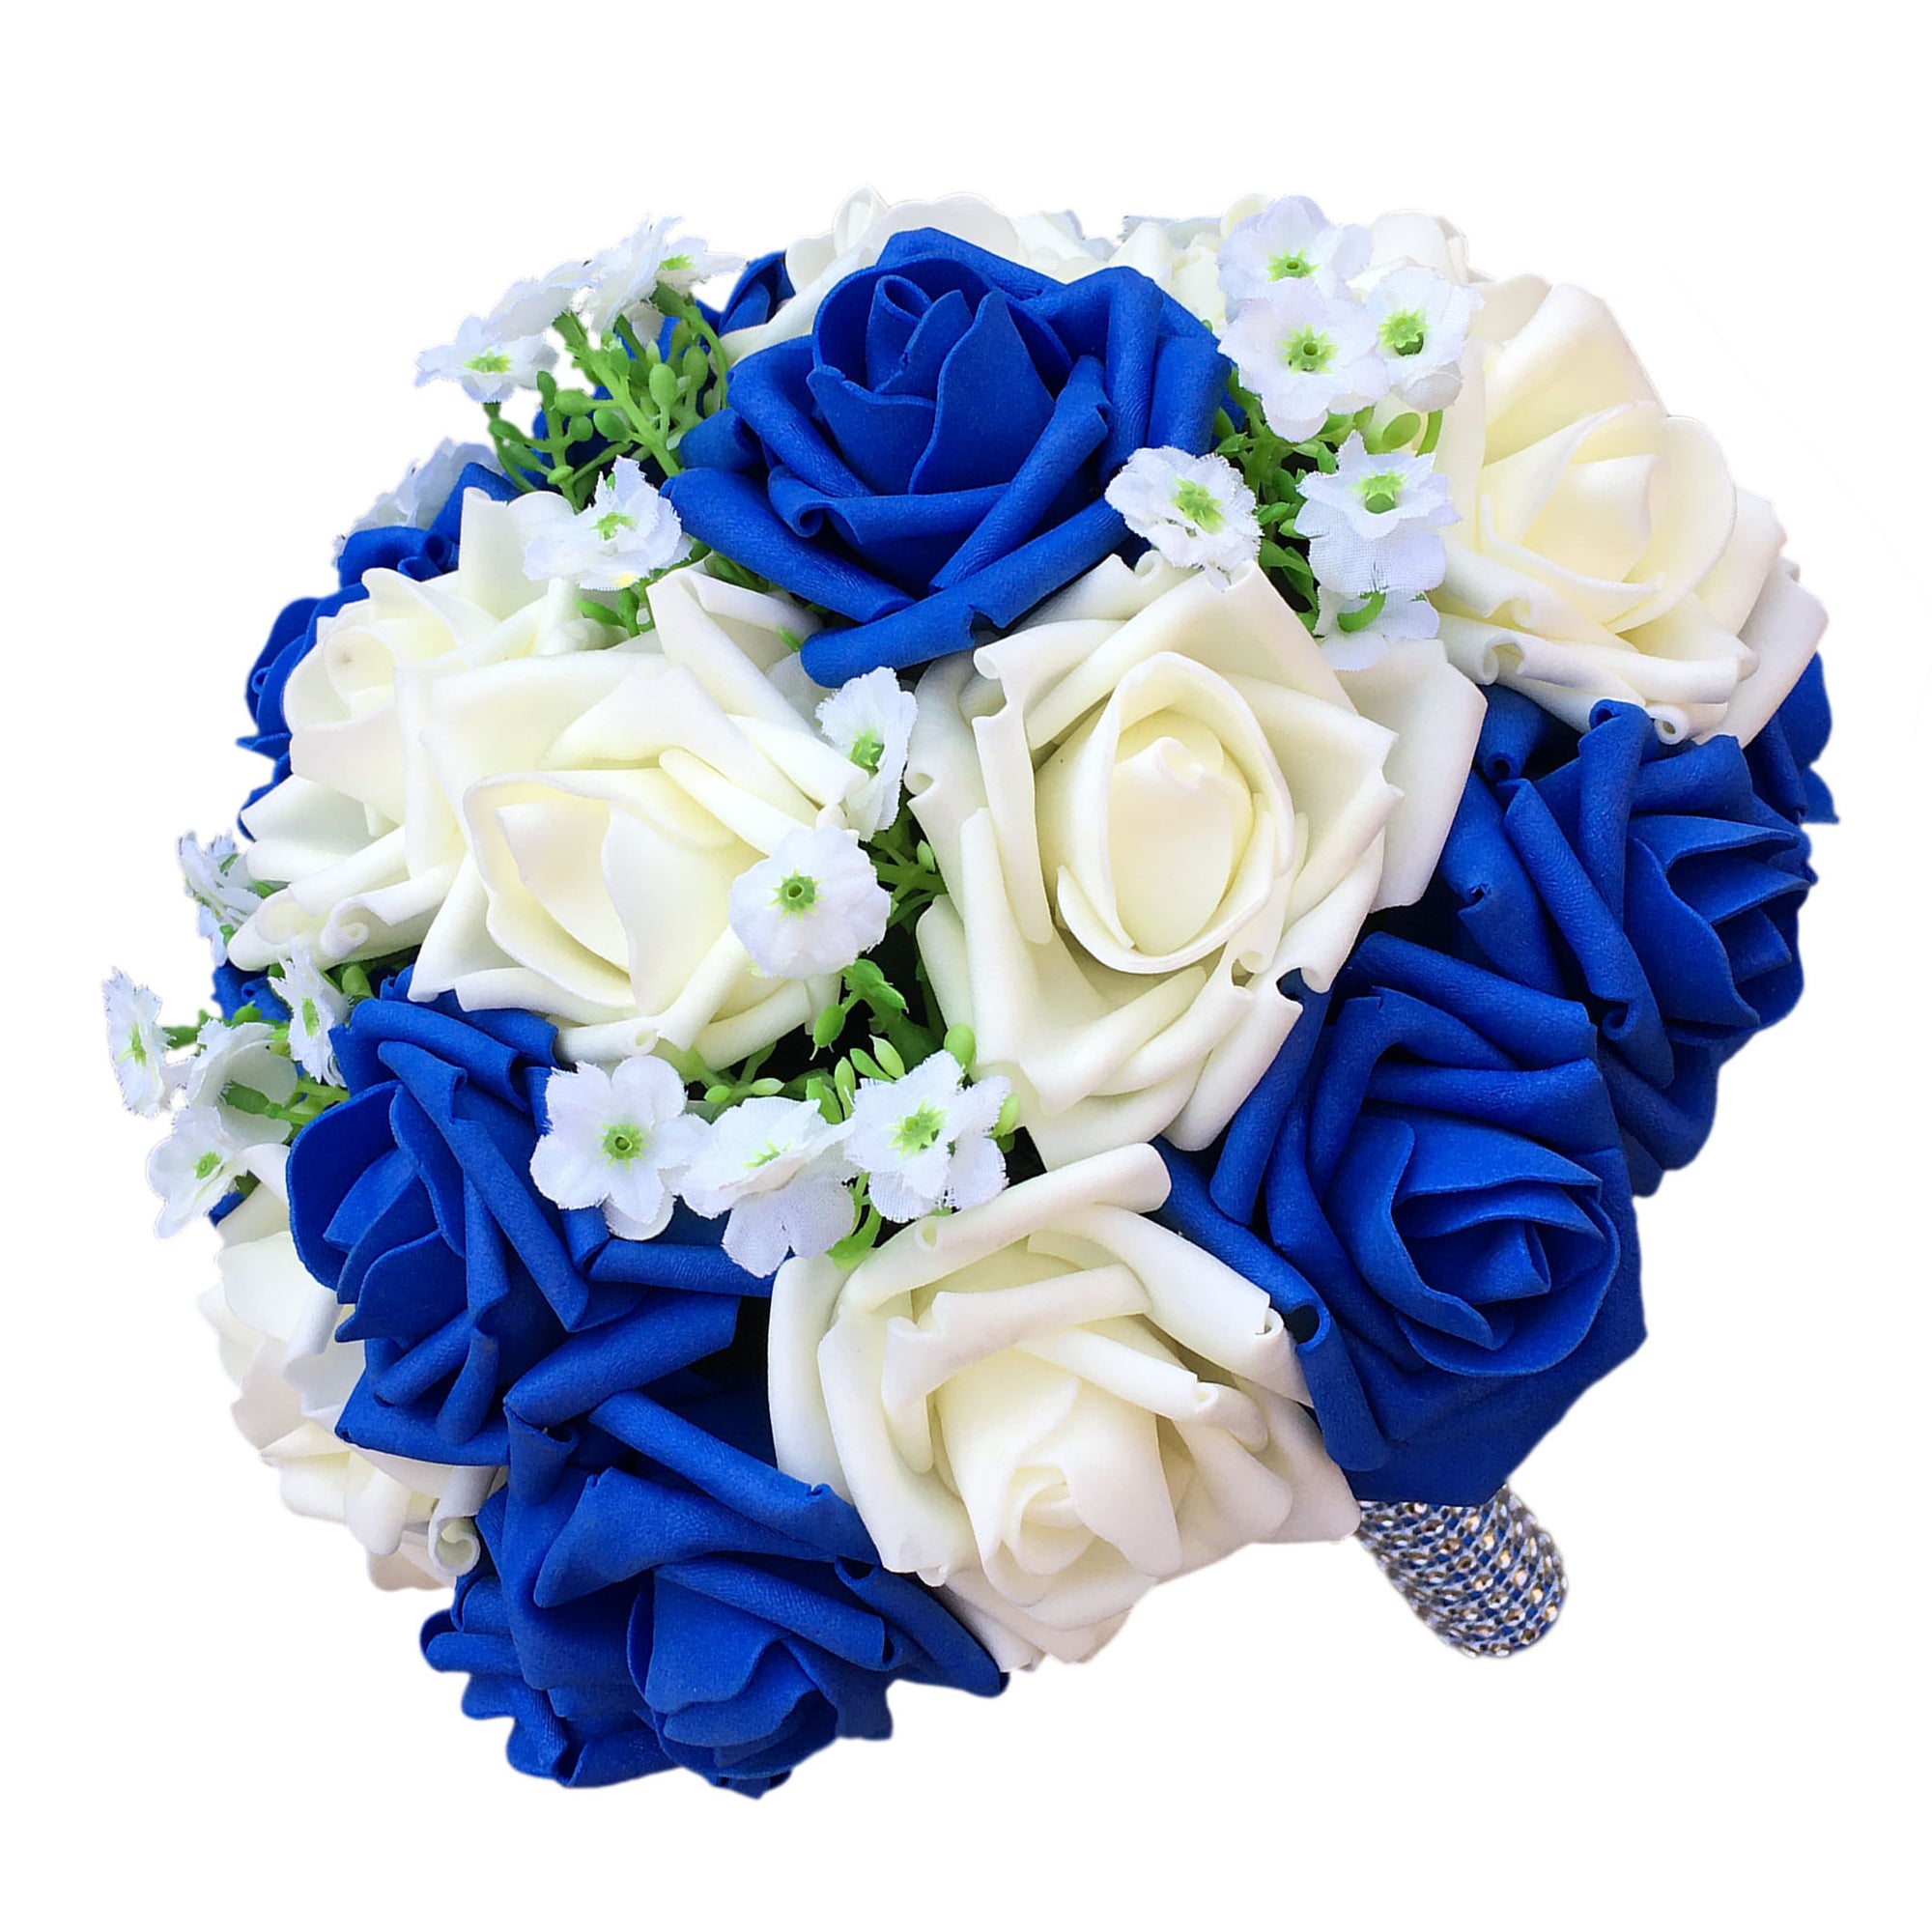 Artificial white ivory wedding flower bouquet Real Touch -  Portugal